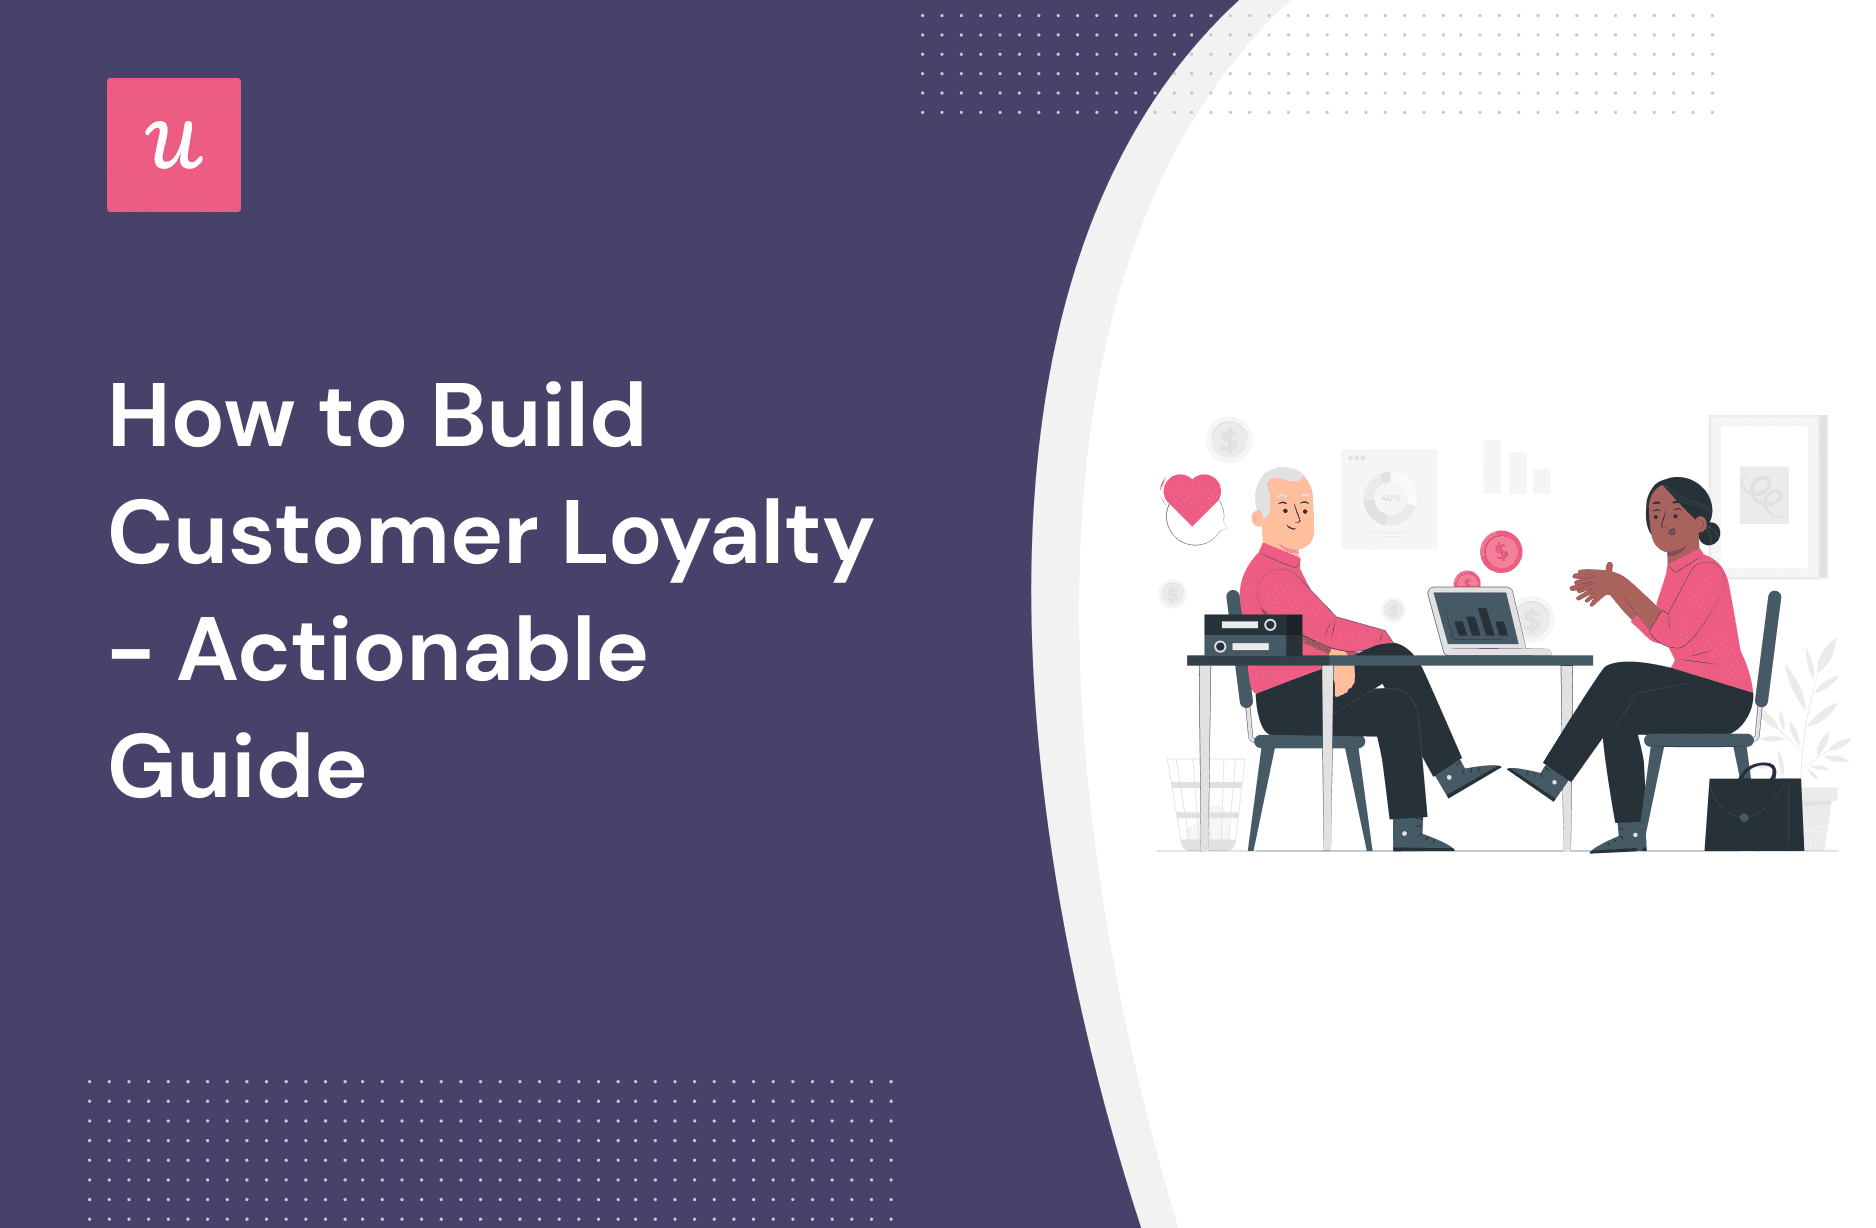 How to Build Customer Loyalty - Actionable Guide cover